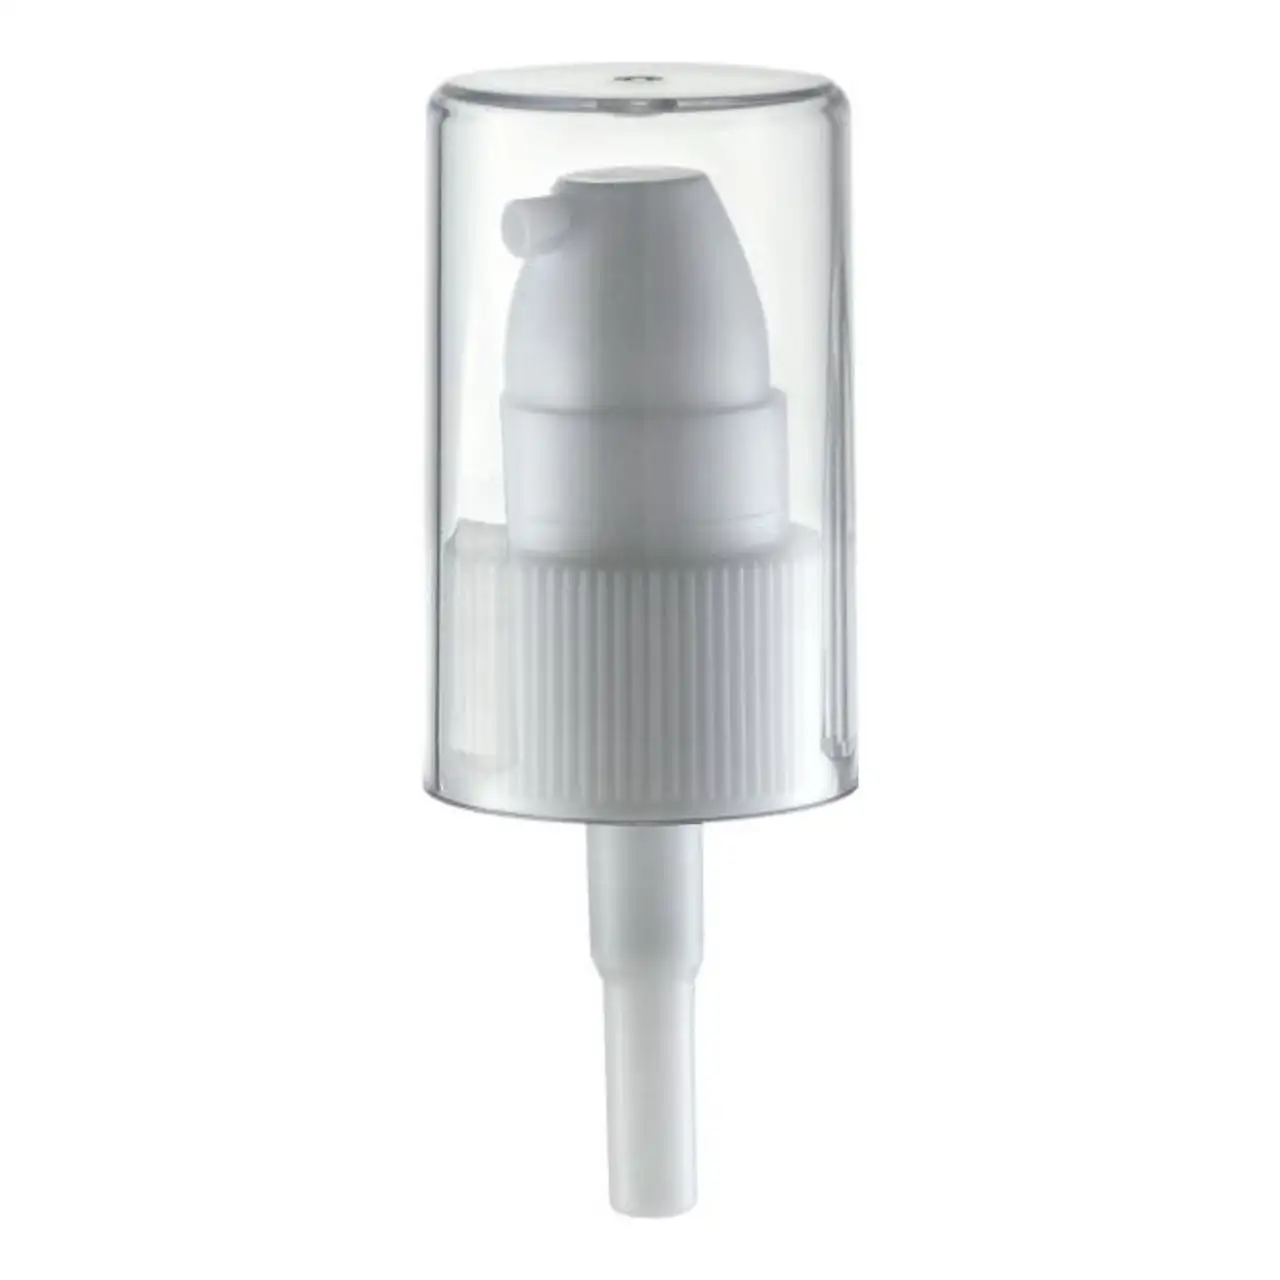 Good quality fast delivery 18/410 cream pump spray with full flat cover plastic treatment pump for skin care